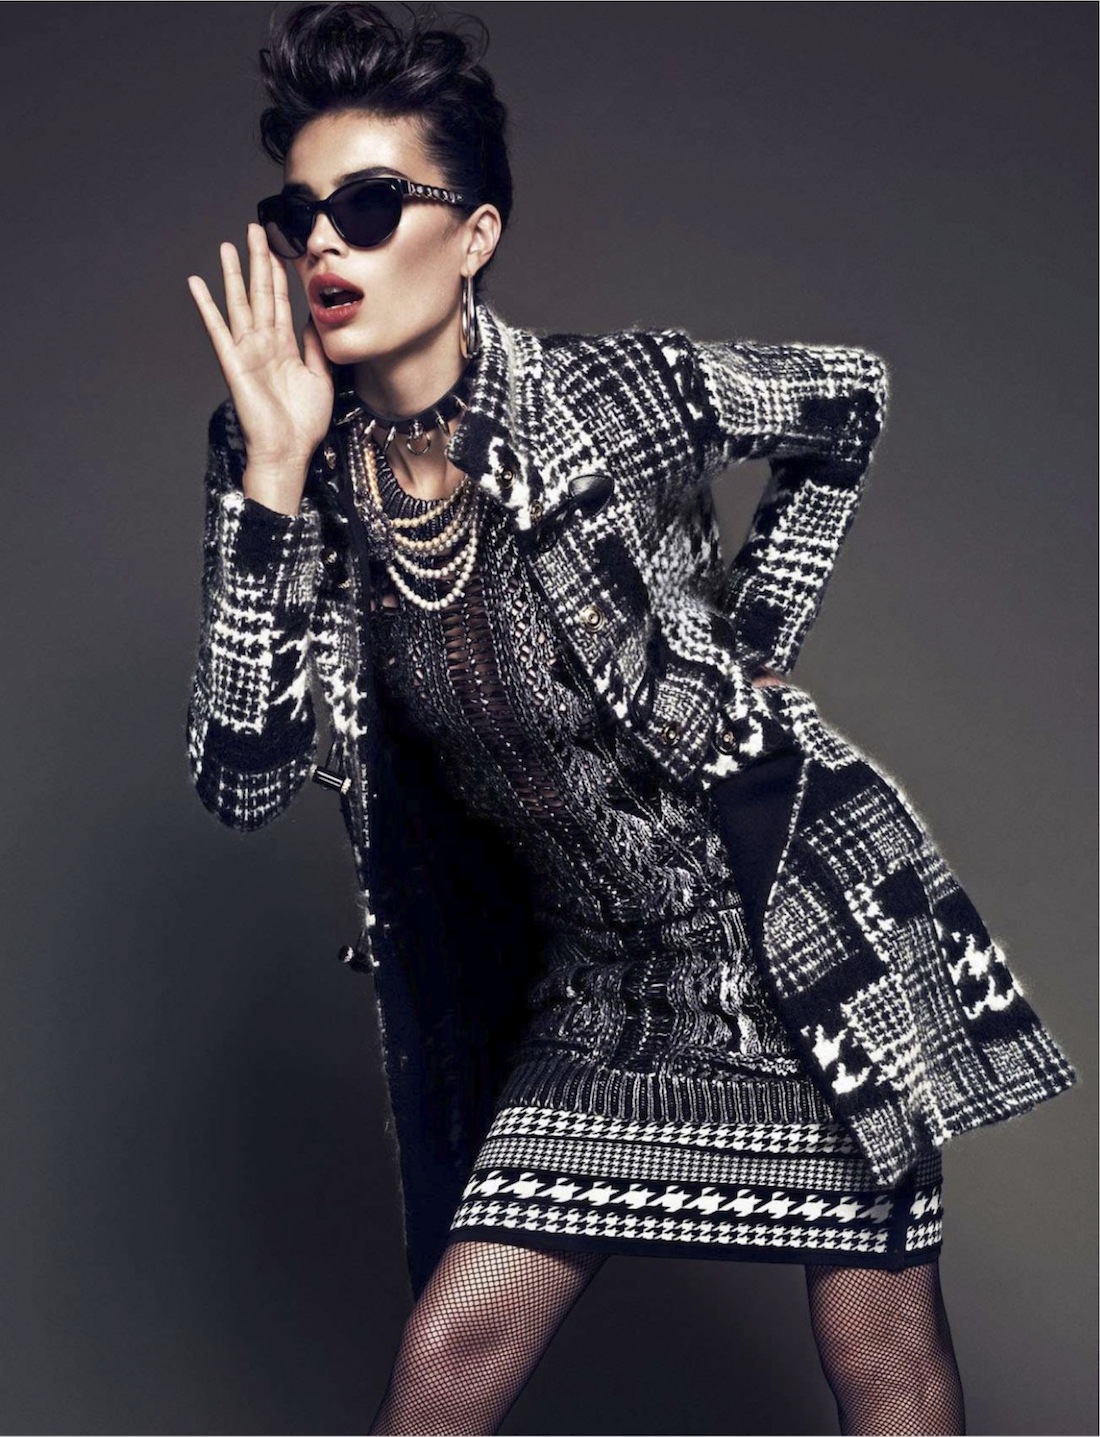 classico glam: marie meyer by jonathan segade for amica november 2012 ...